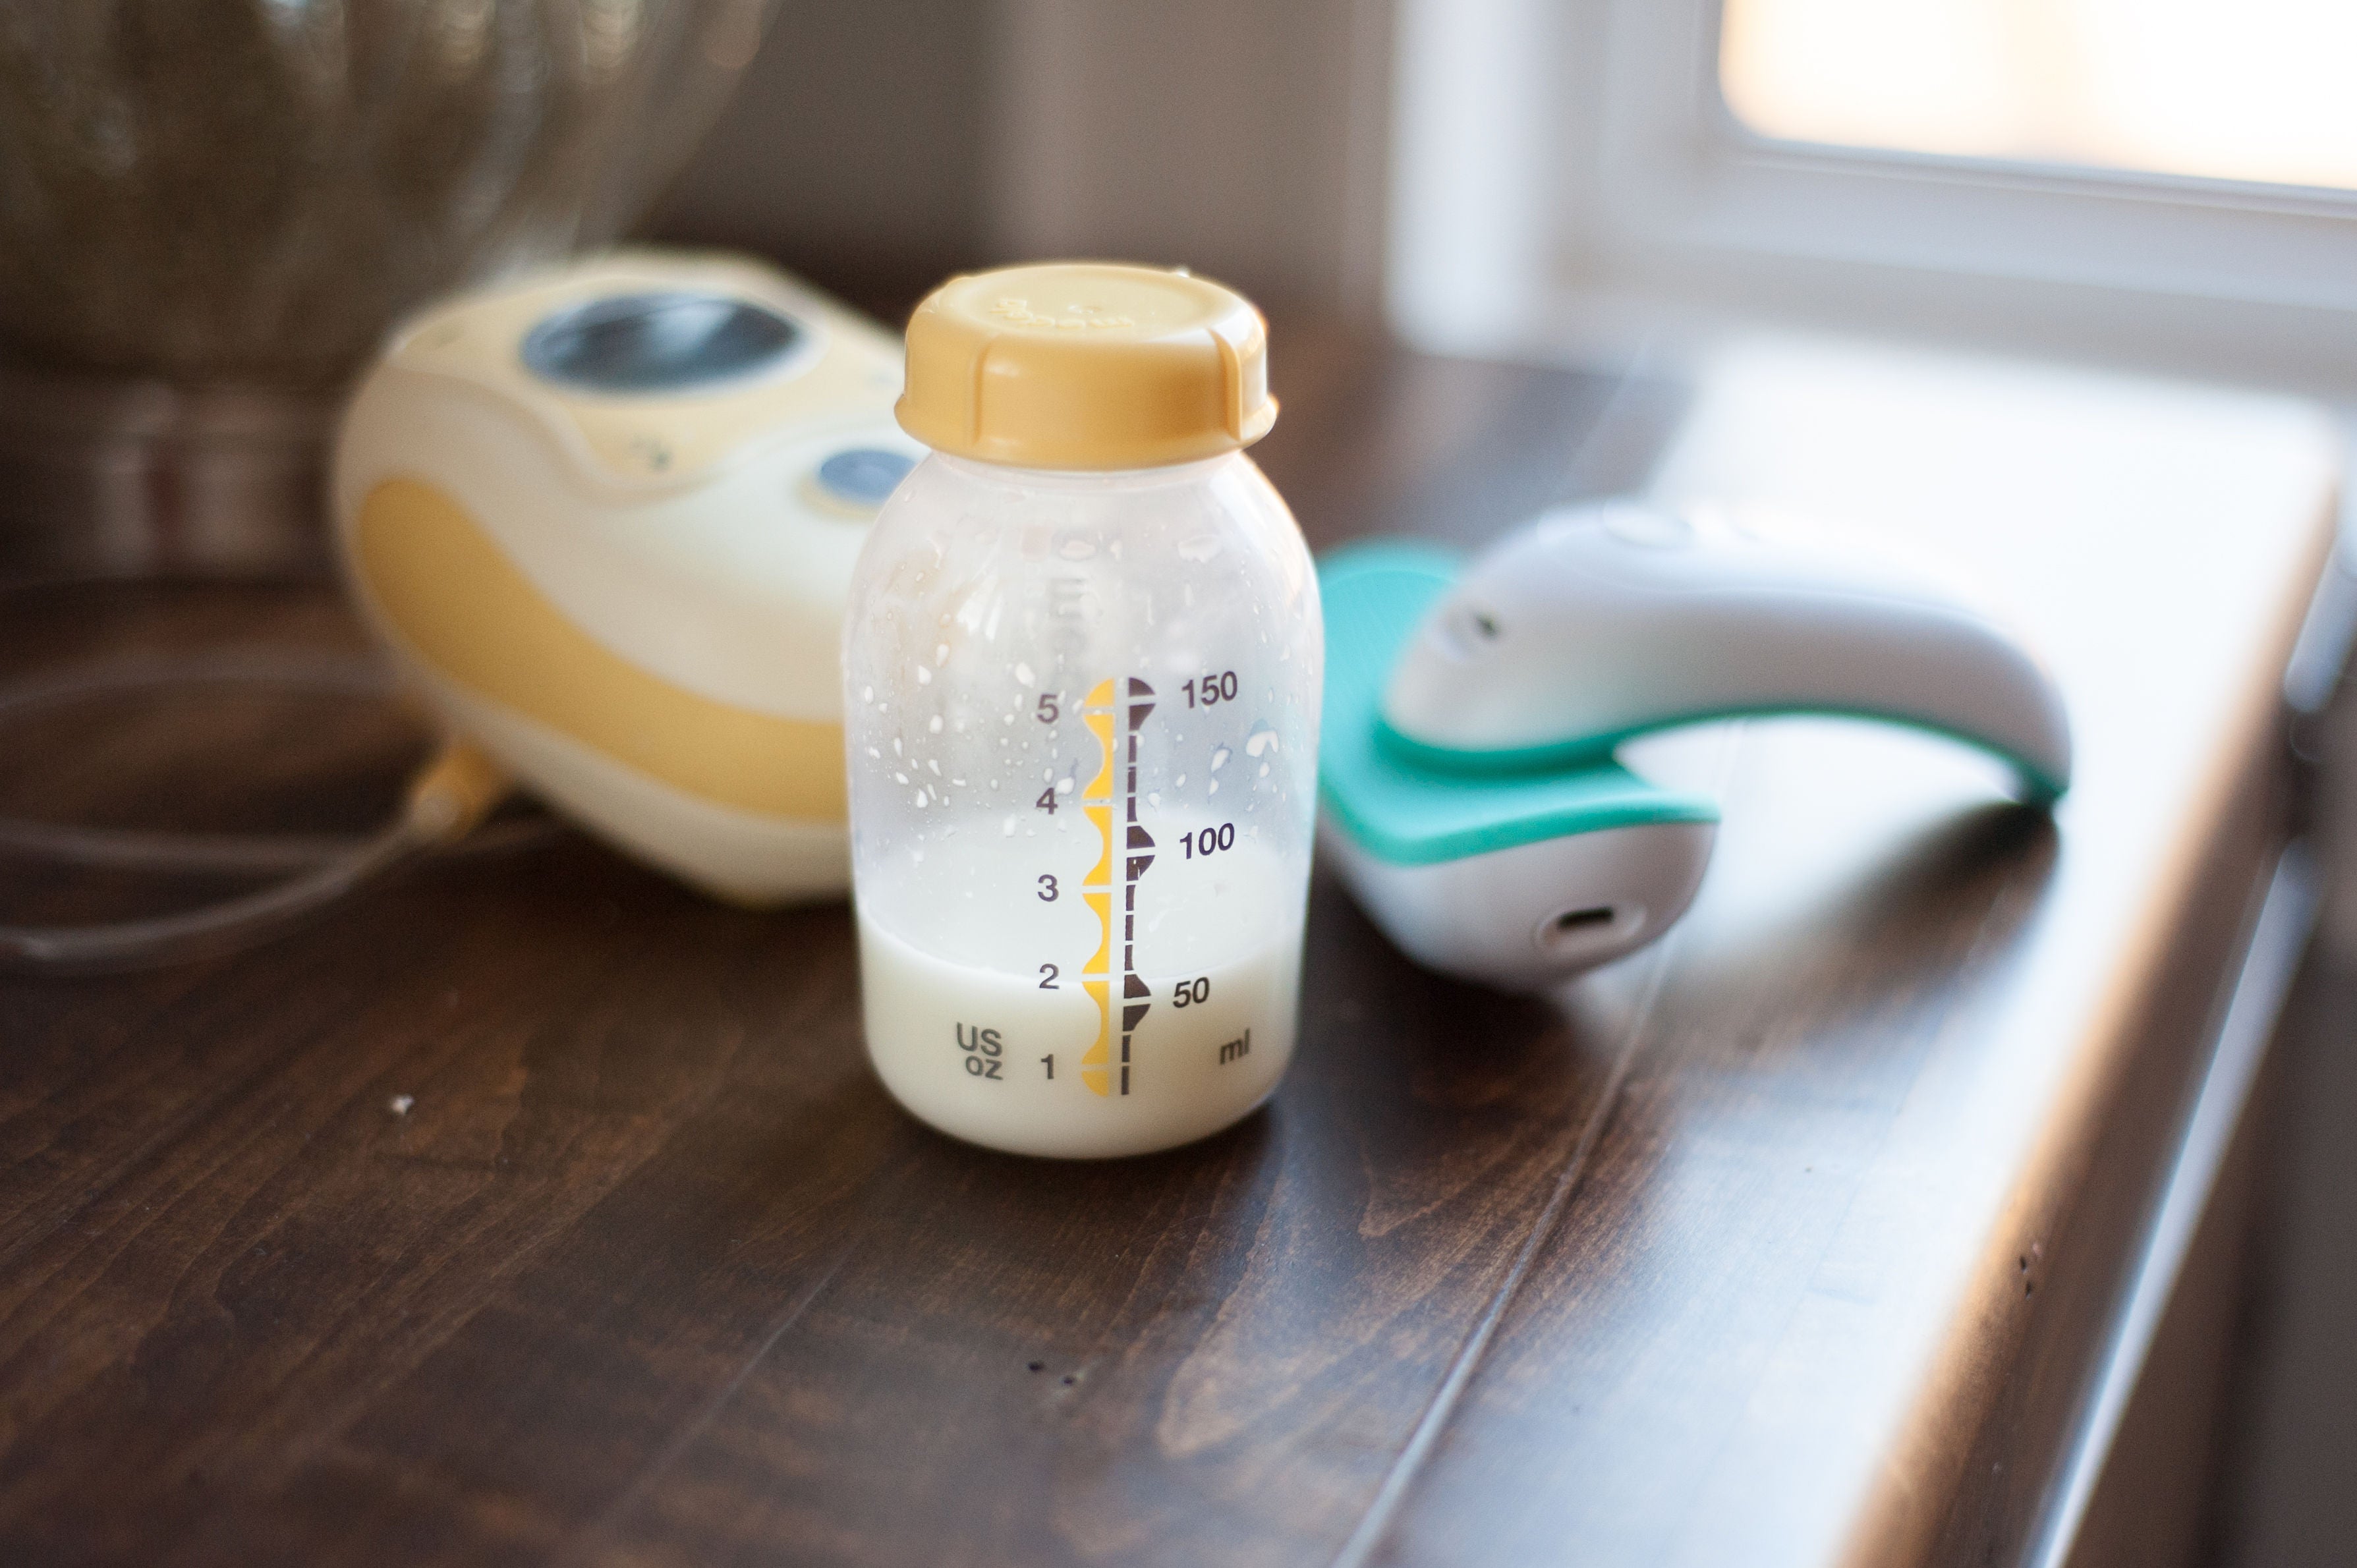 How to Warm Breast Milk Safely - Exclusive Pumping